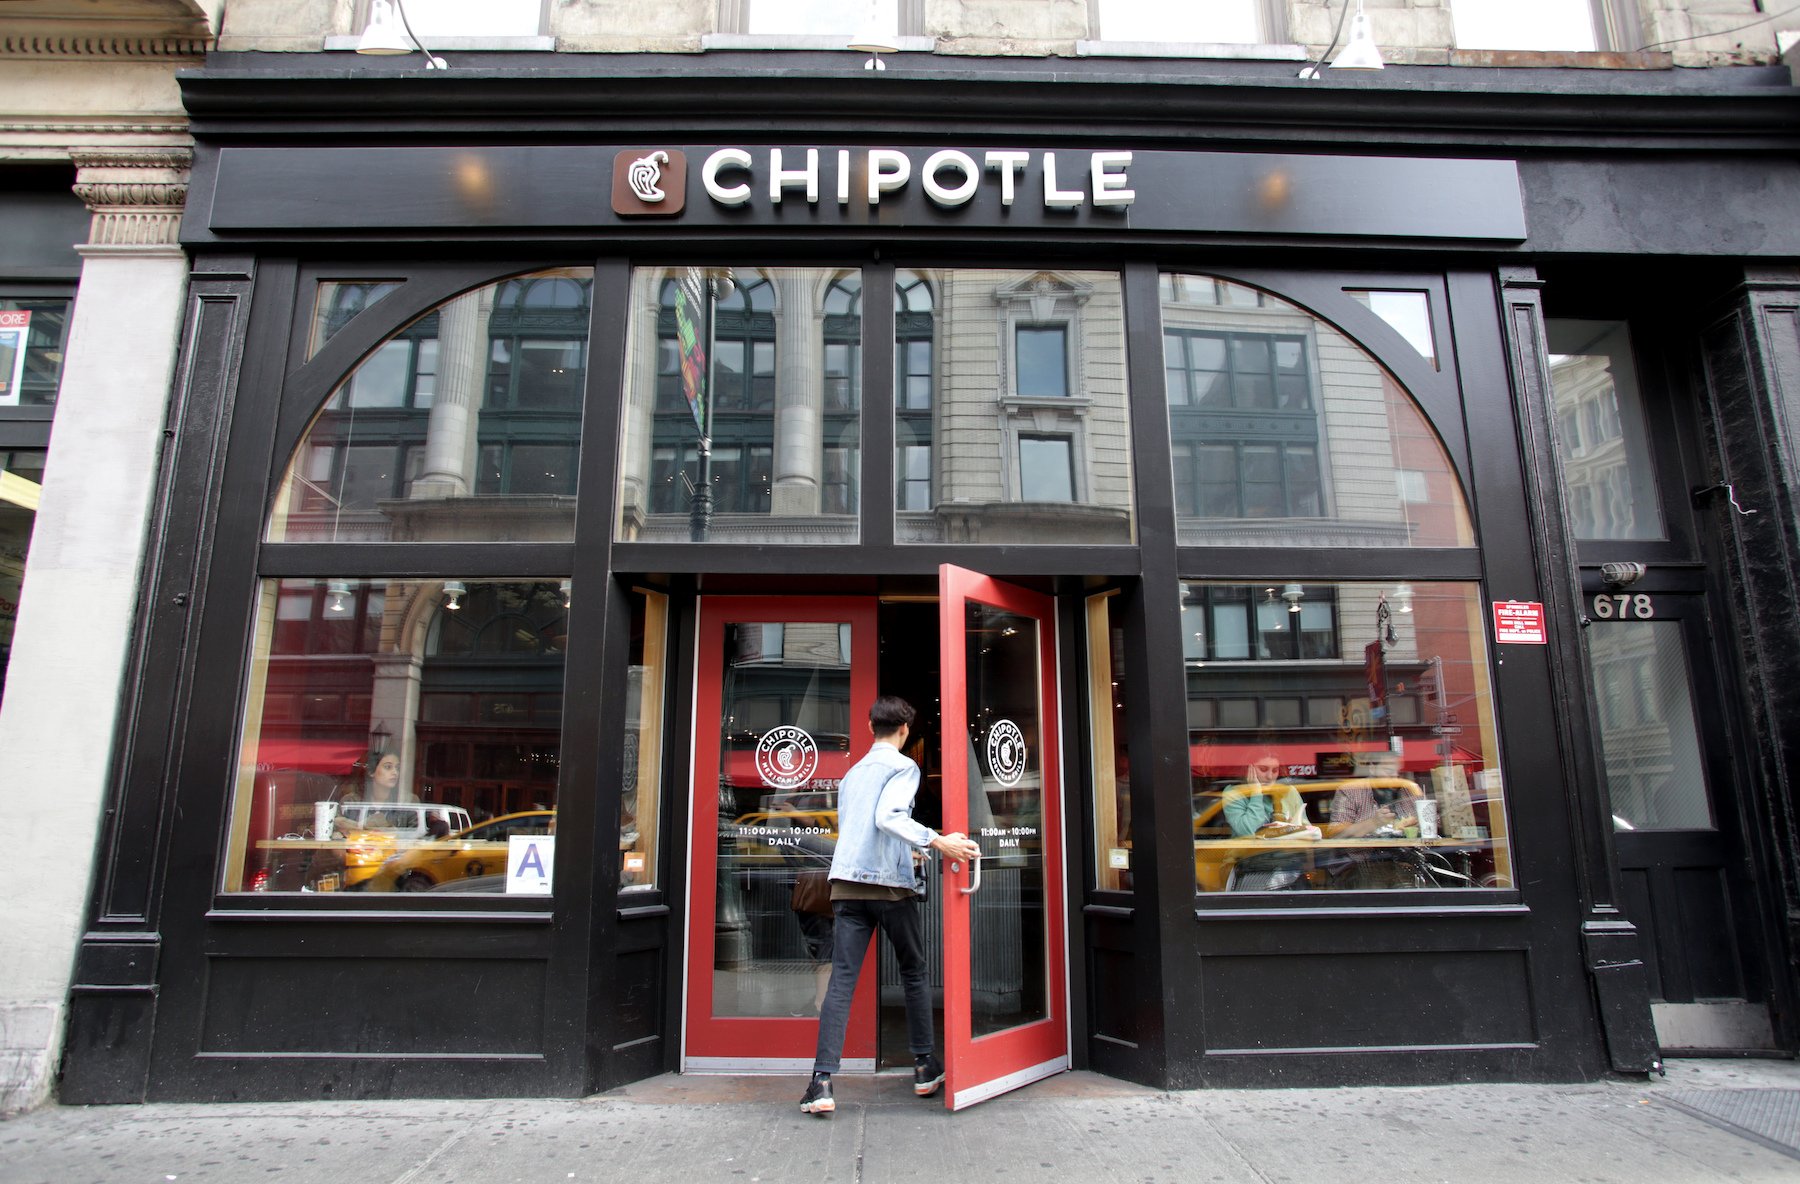 How to order a blood-sugar friendly meal at Chipotle